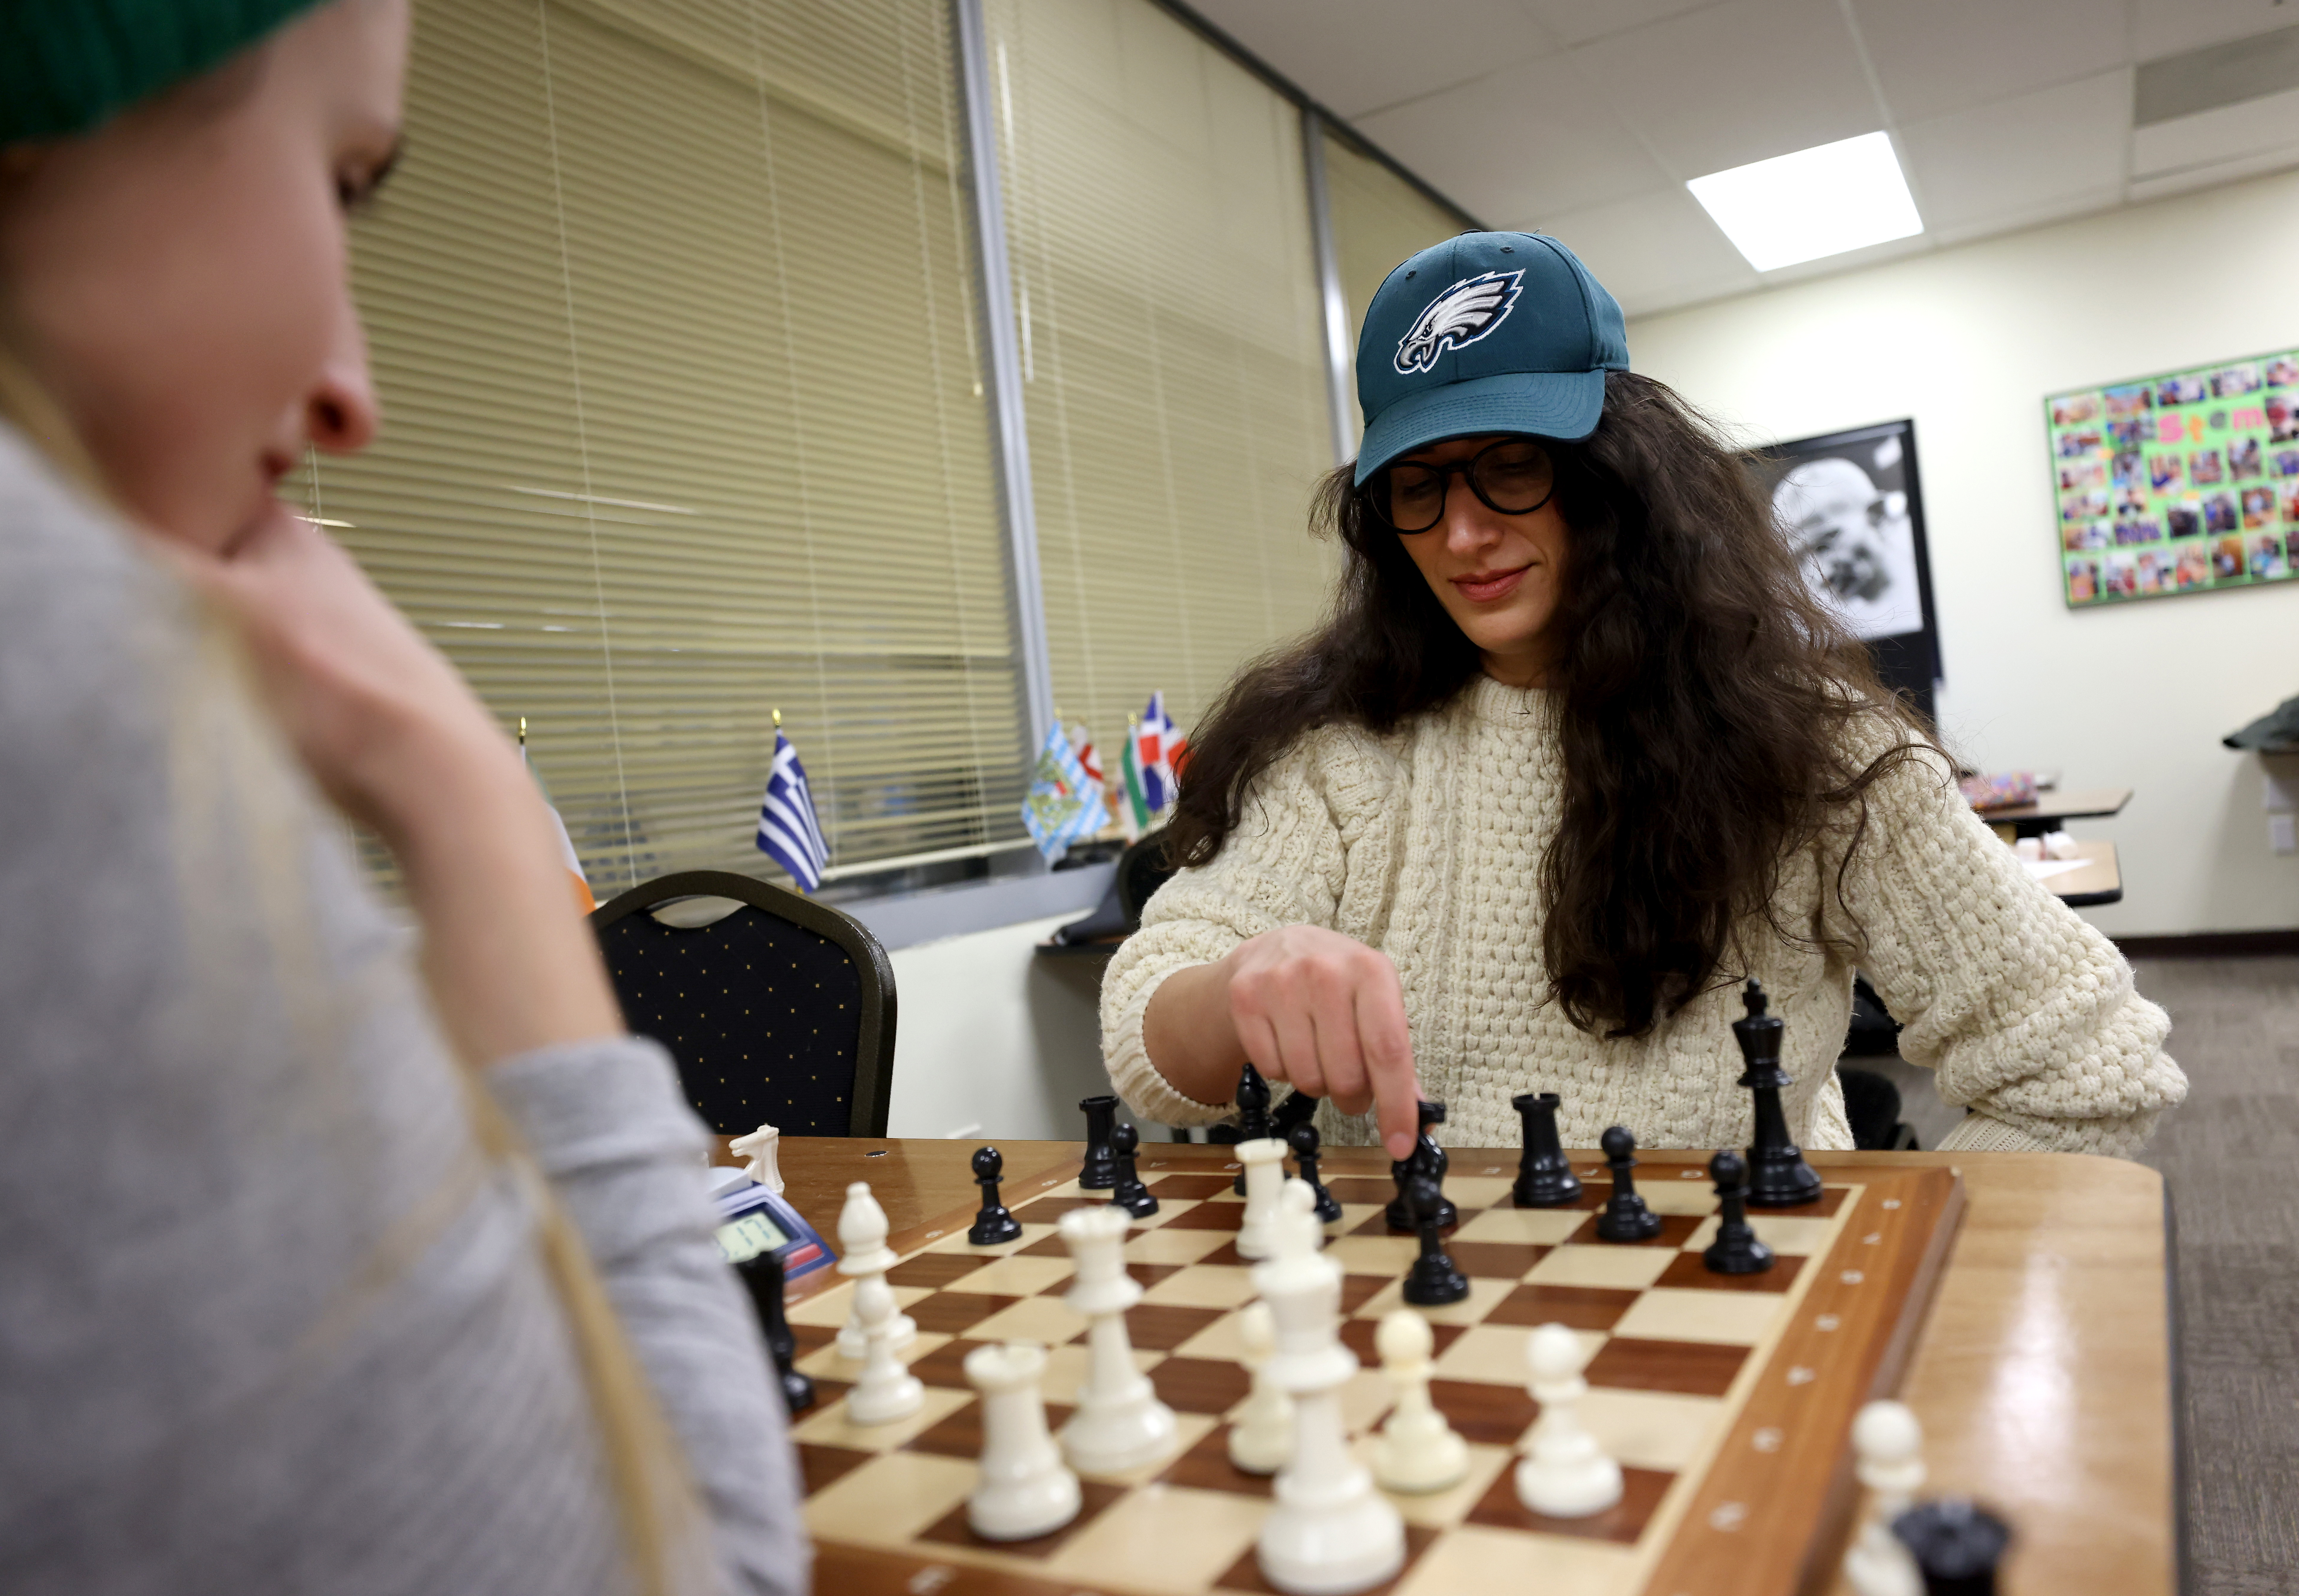 The Super Bowl of chess in N.J.? That's the vision for one local